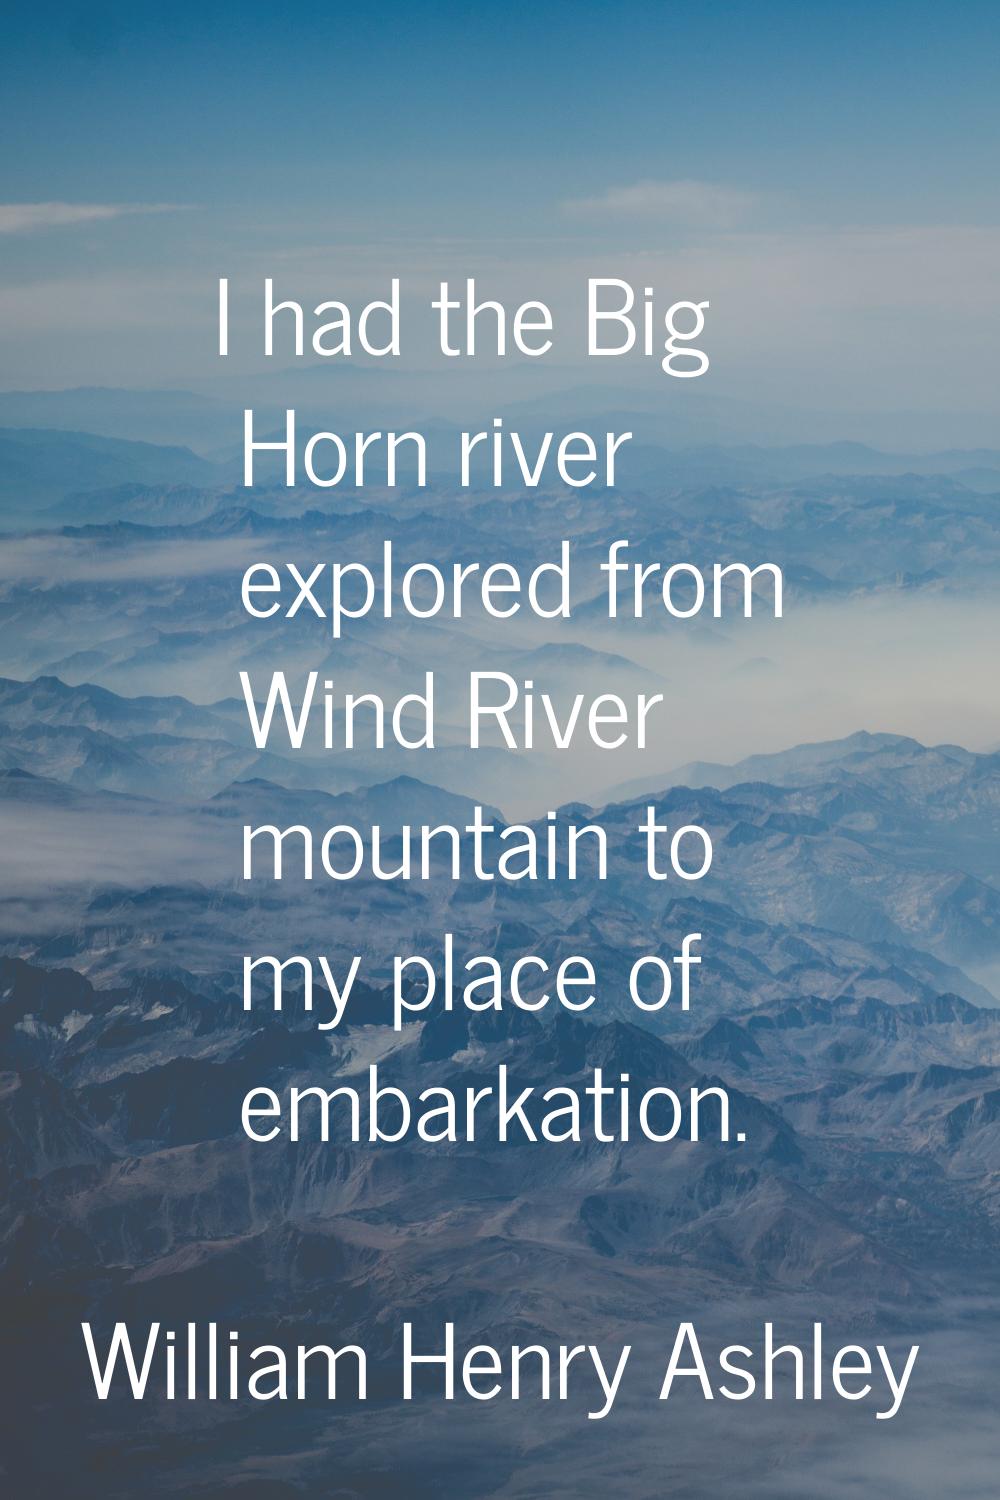 I had the Big Horn river explored from Wind River mountain to my place of embarkation.